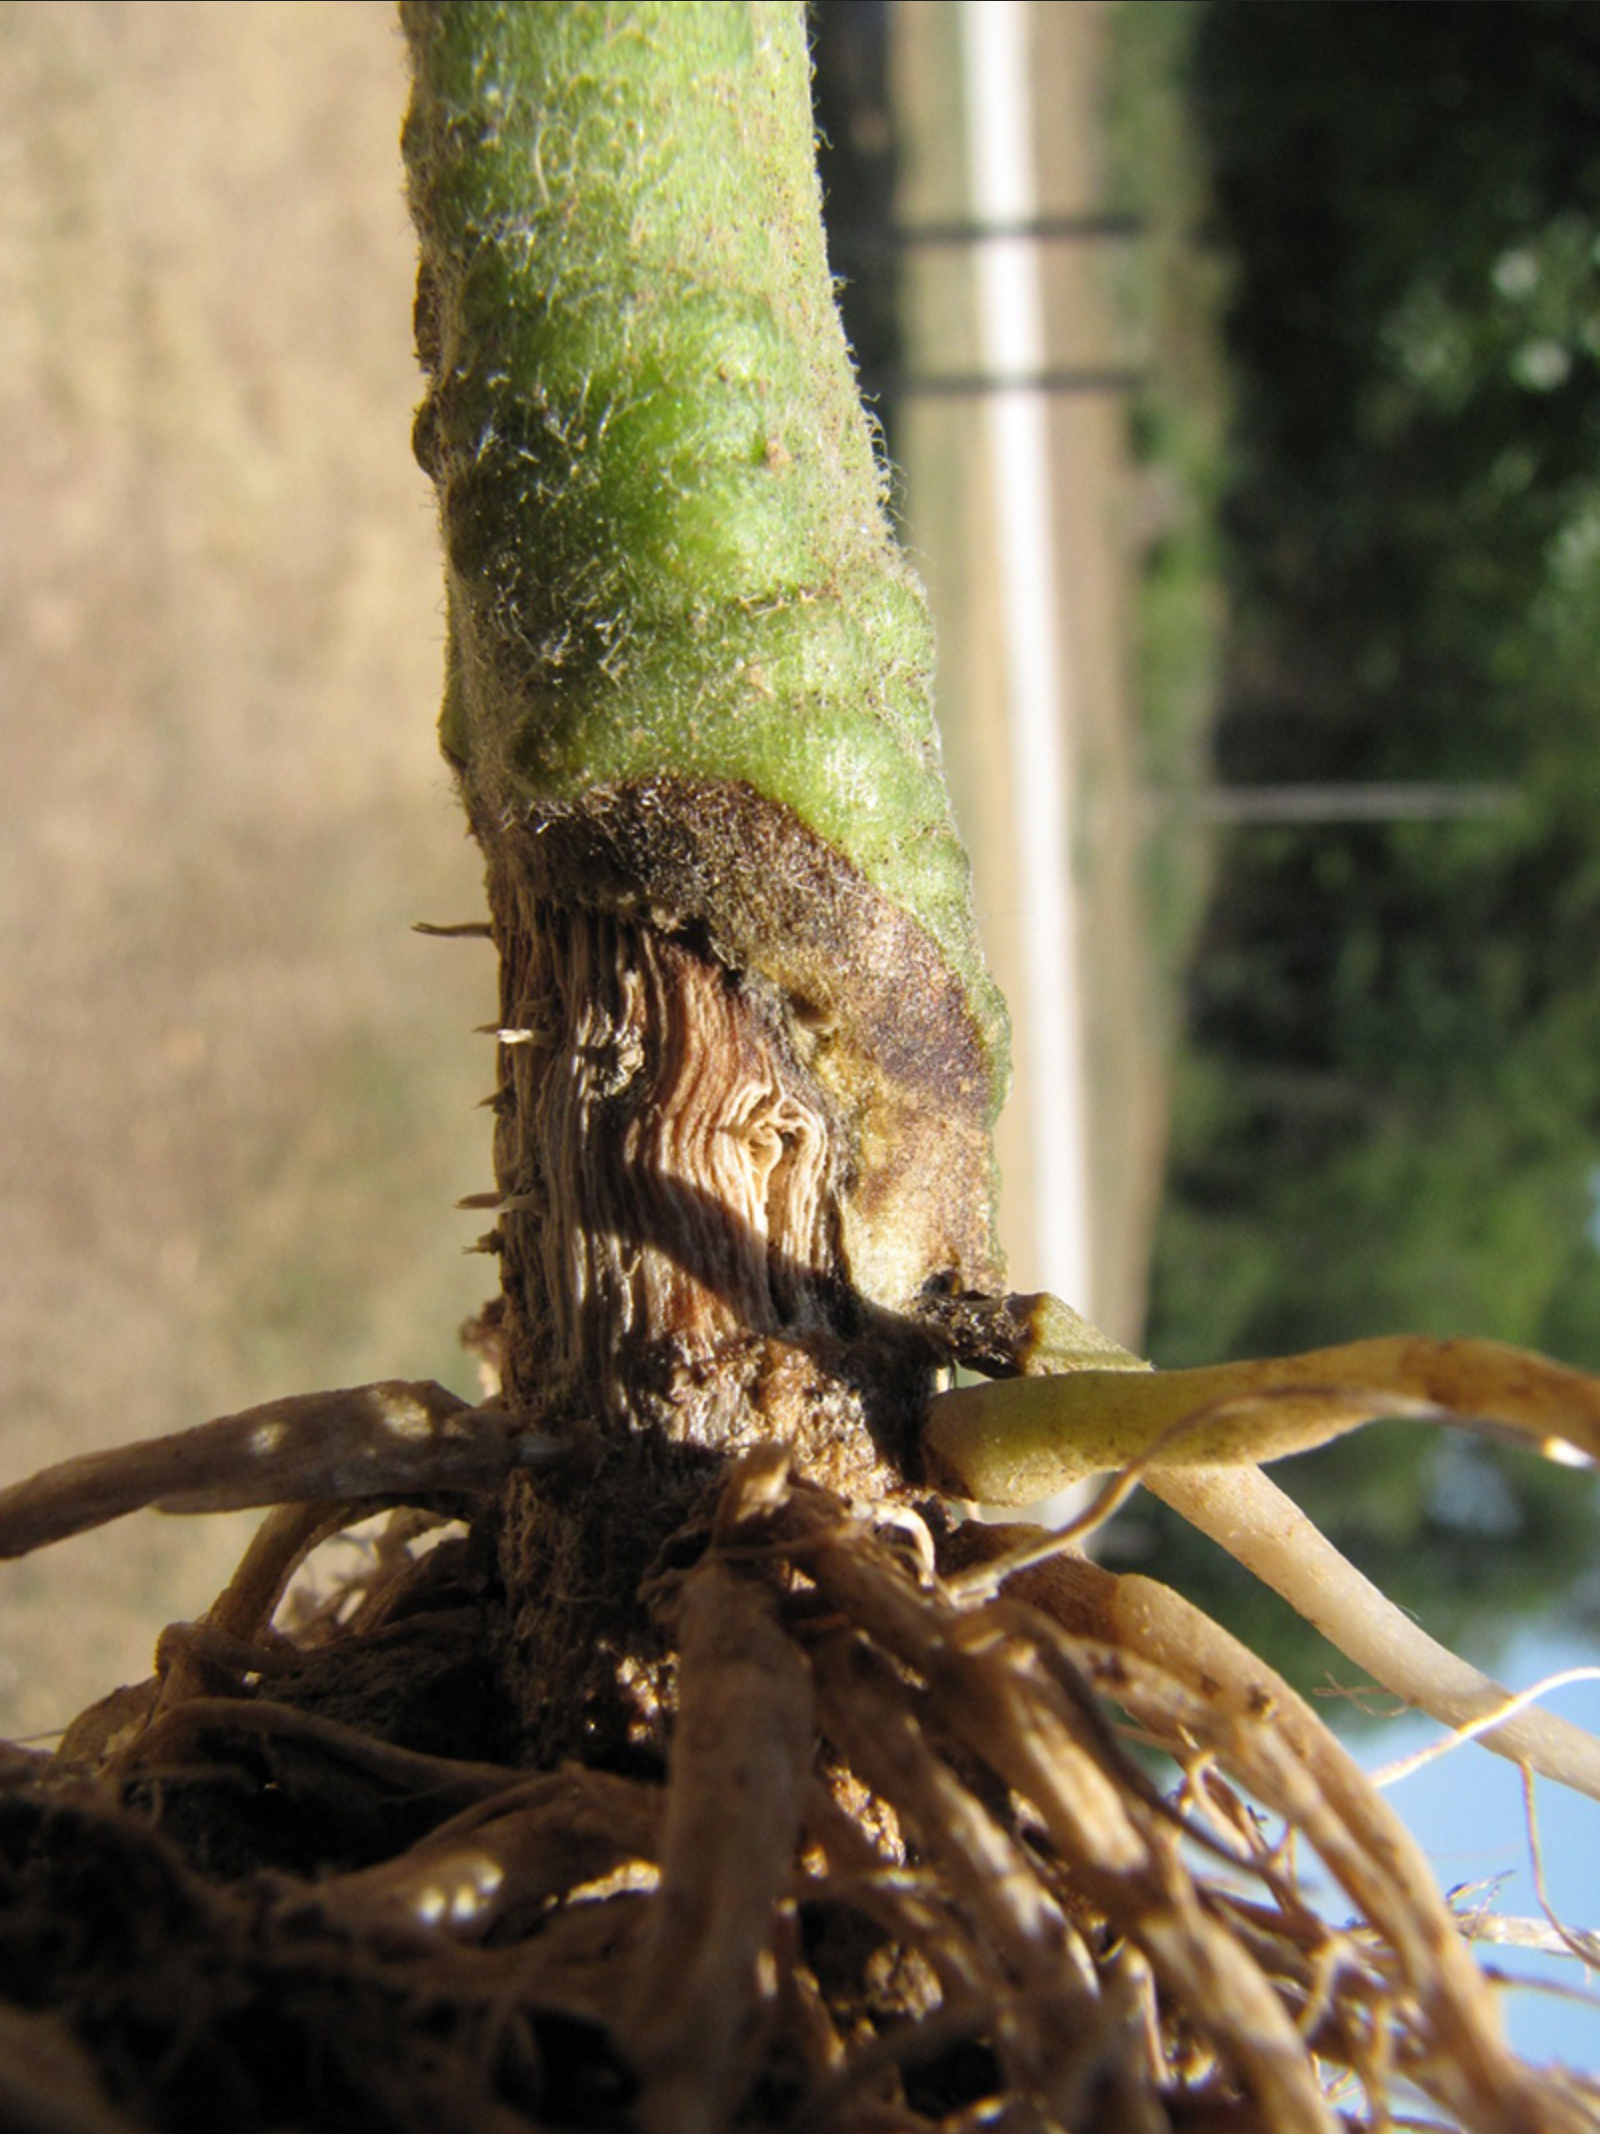 Fusarium crown and root rot of tomato